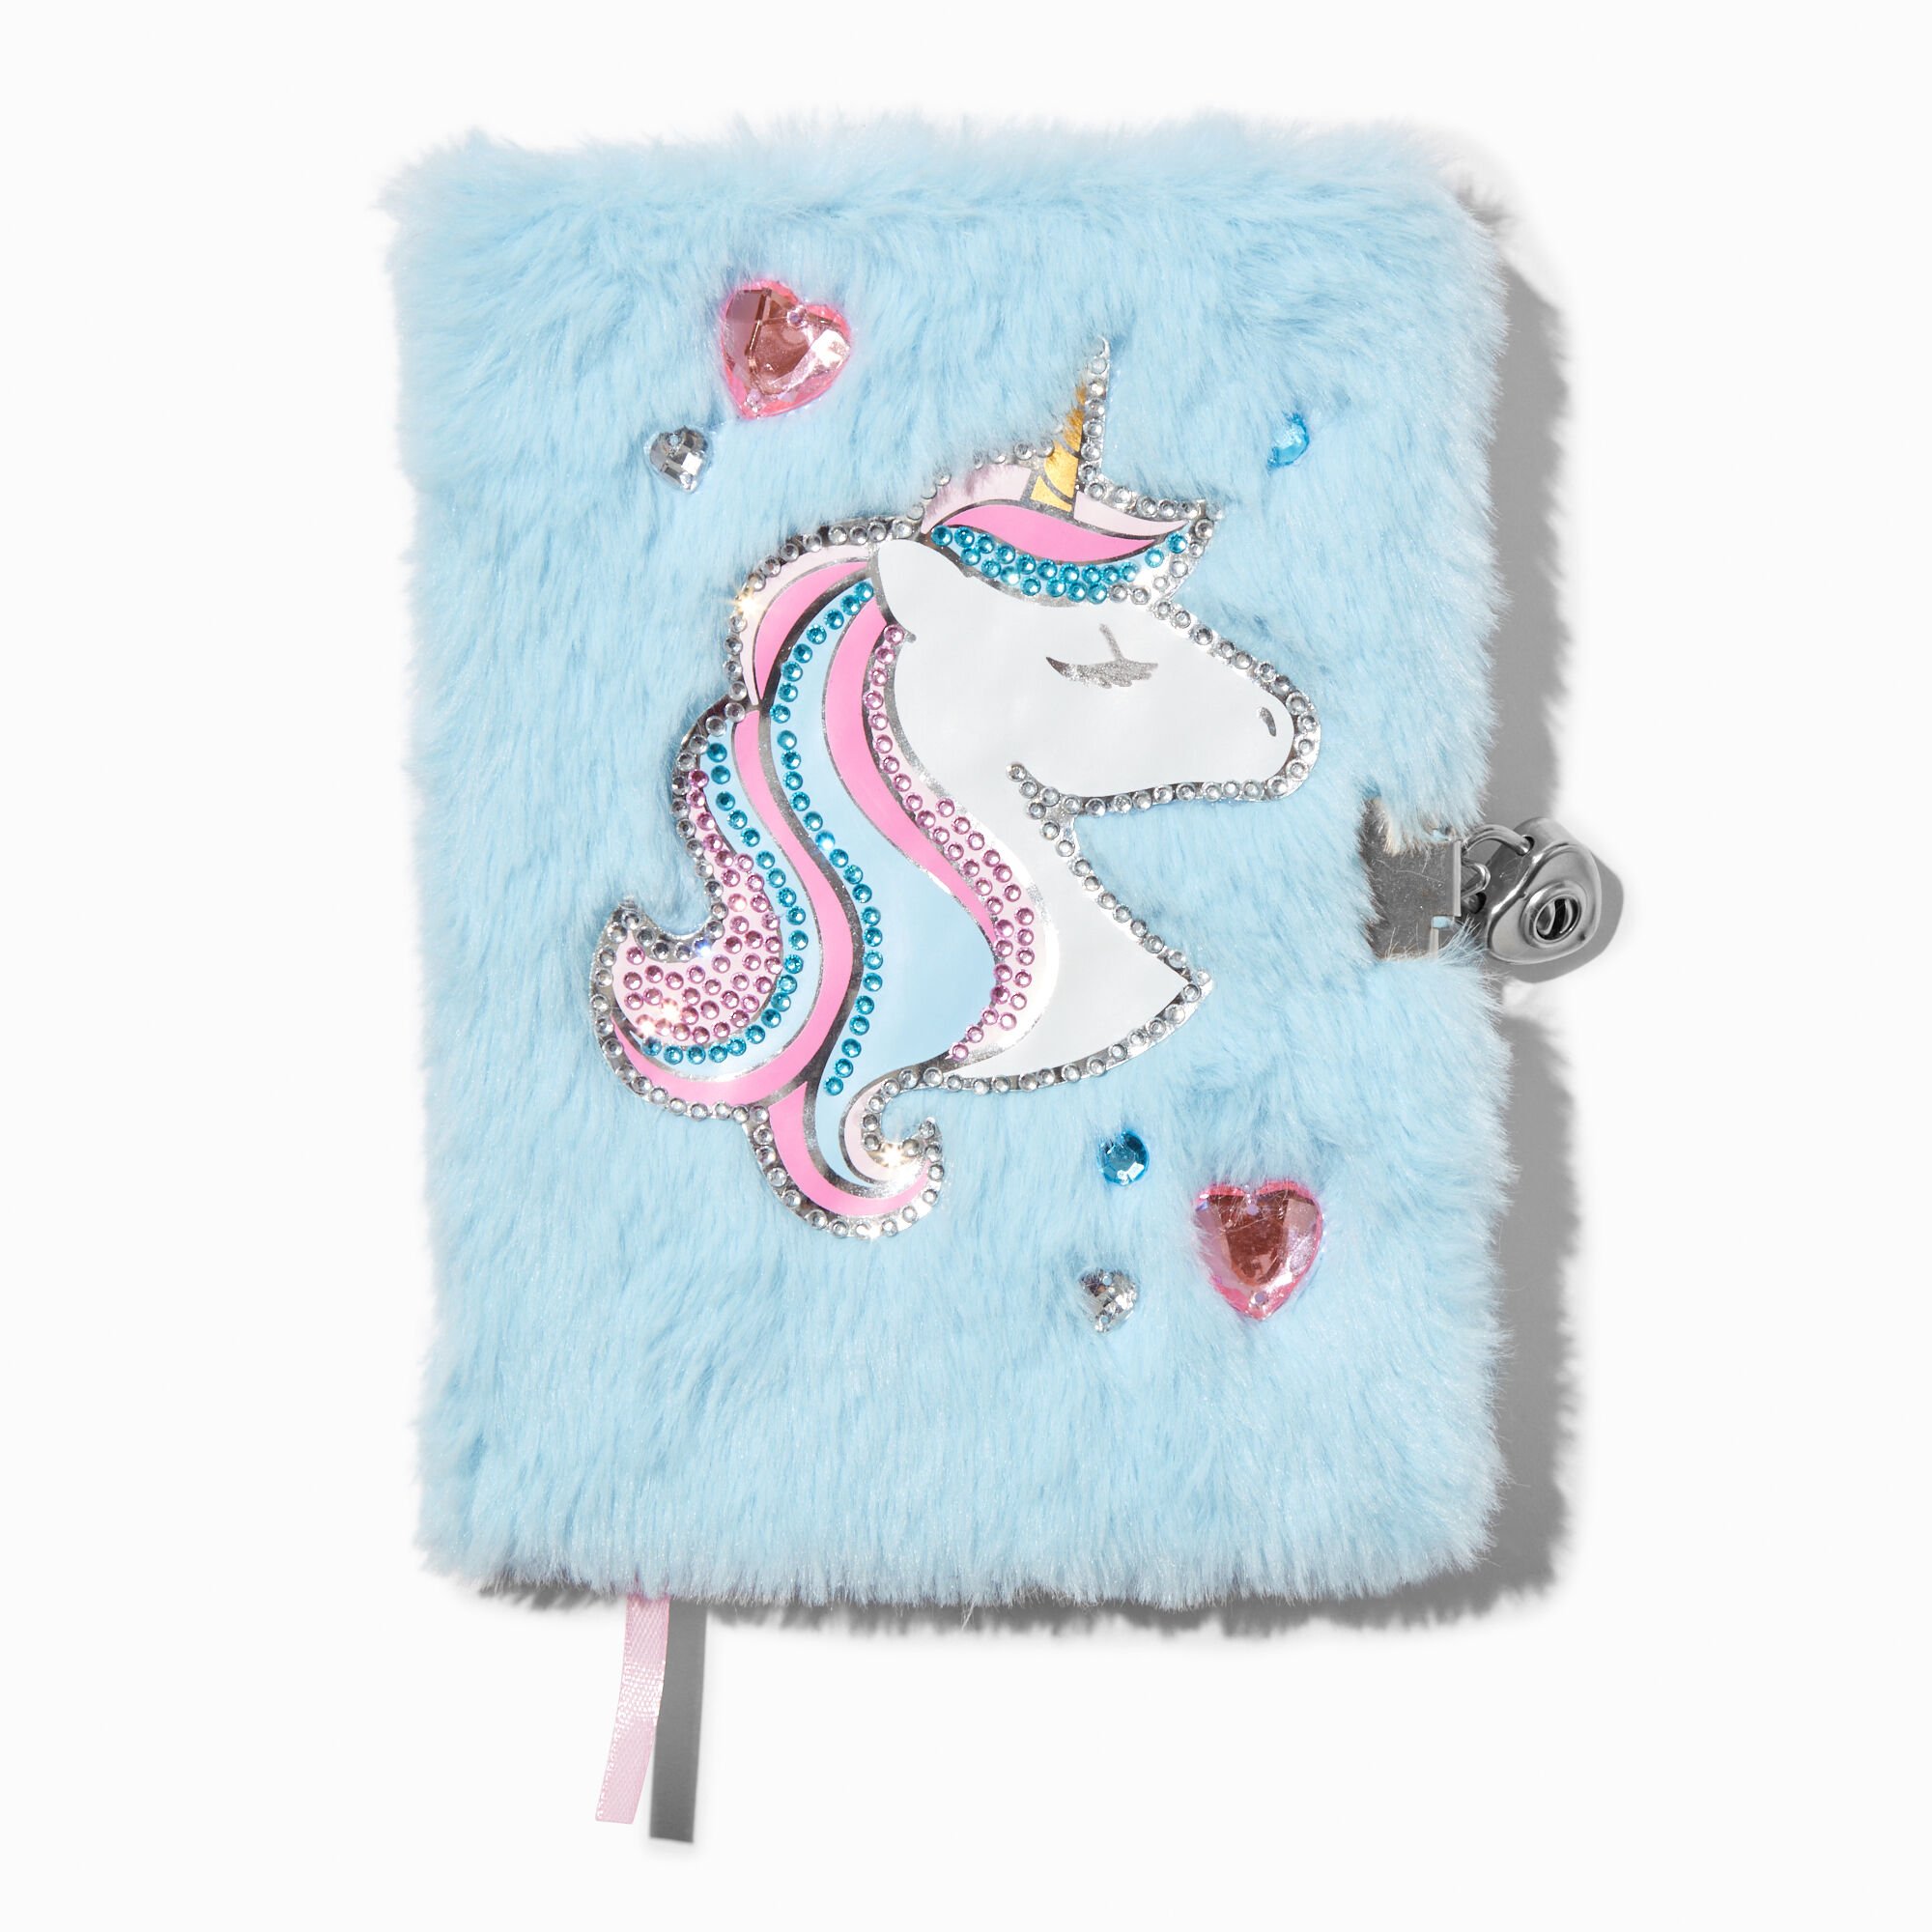 View Claires Unicorn Gem Furry Lock Diary information